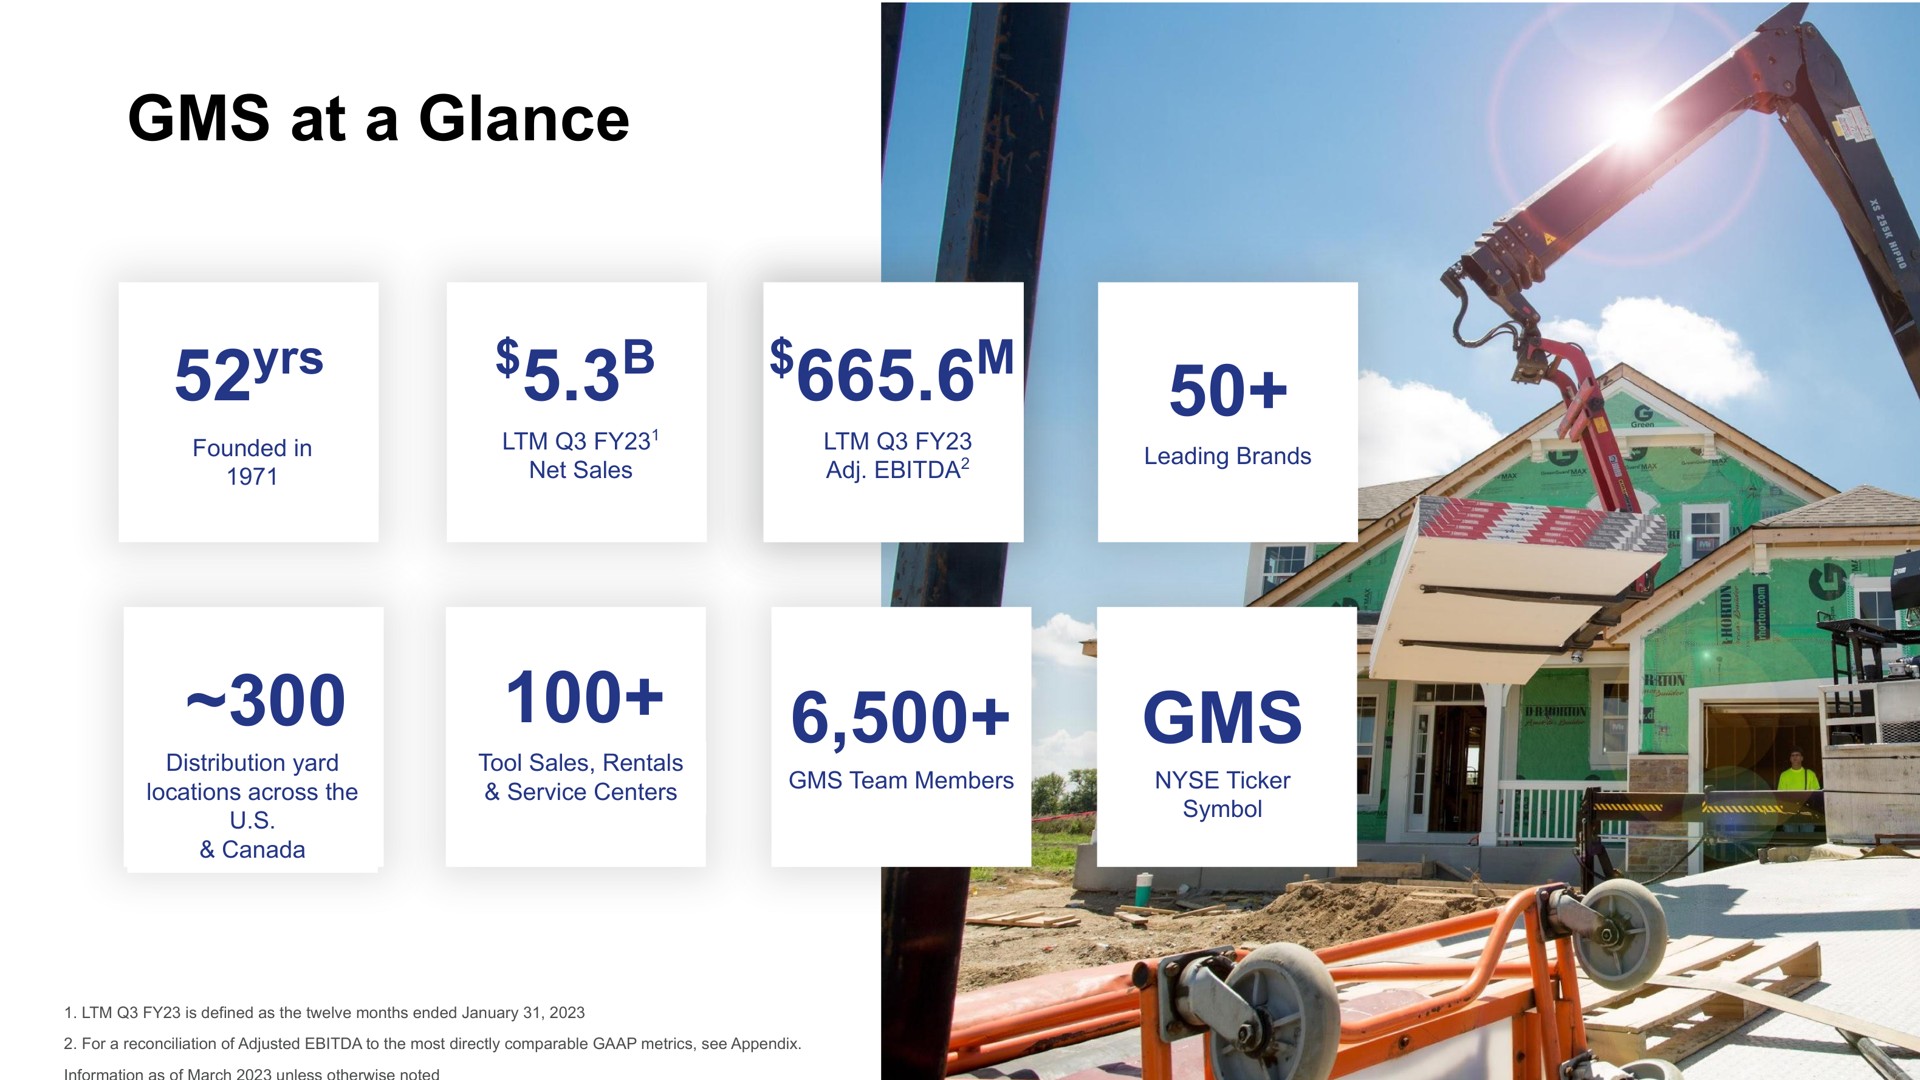 at a glance yrs | GMS